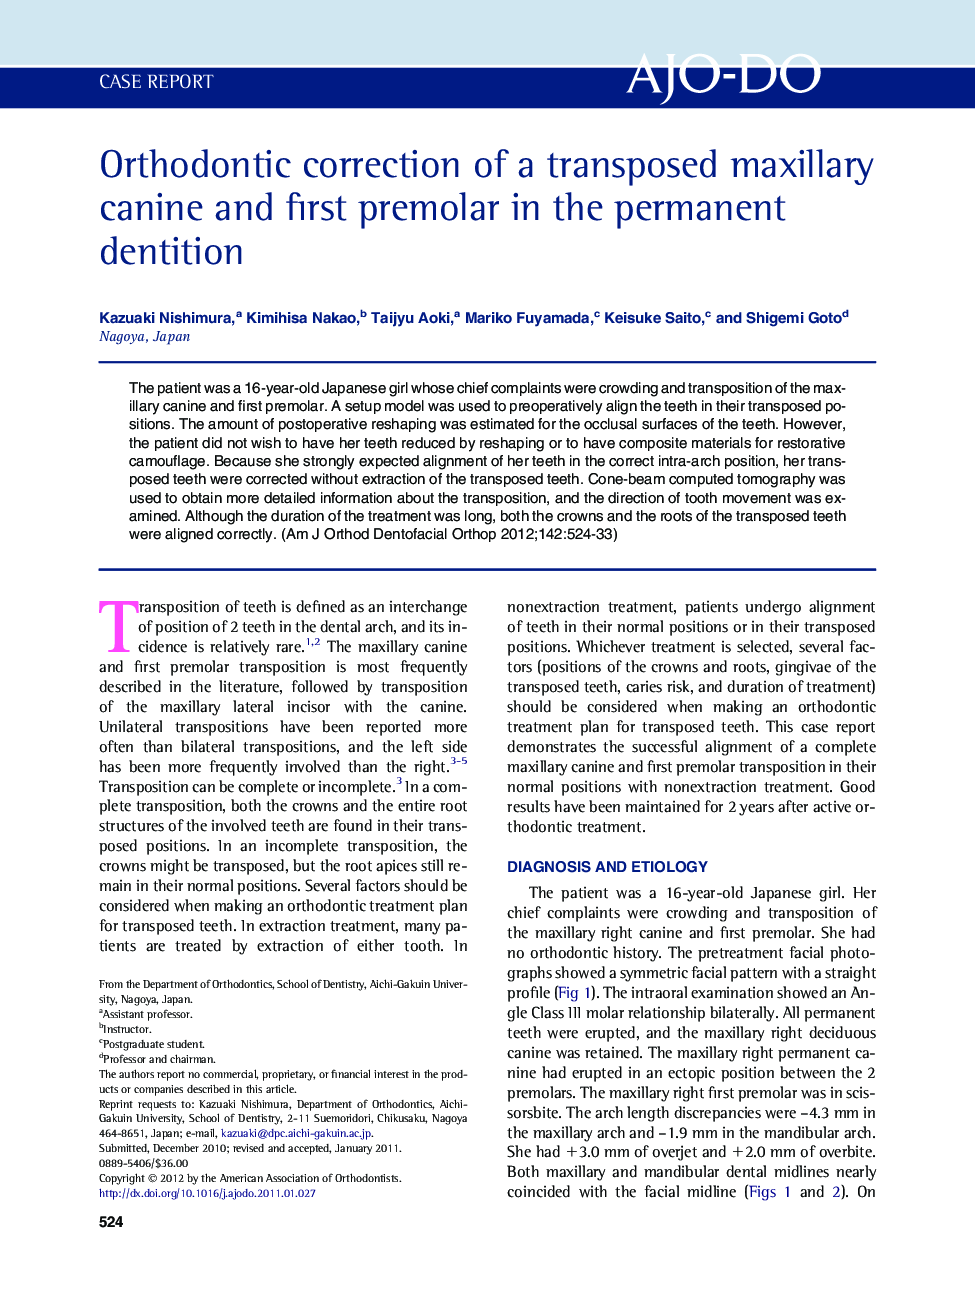 Orthodontic correction of a transposed maxillary canine and first premolar in the permanent dentition 